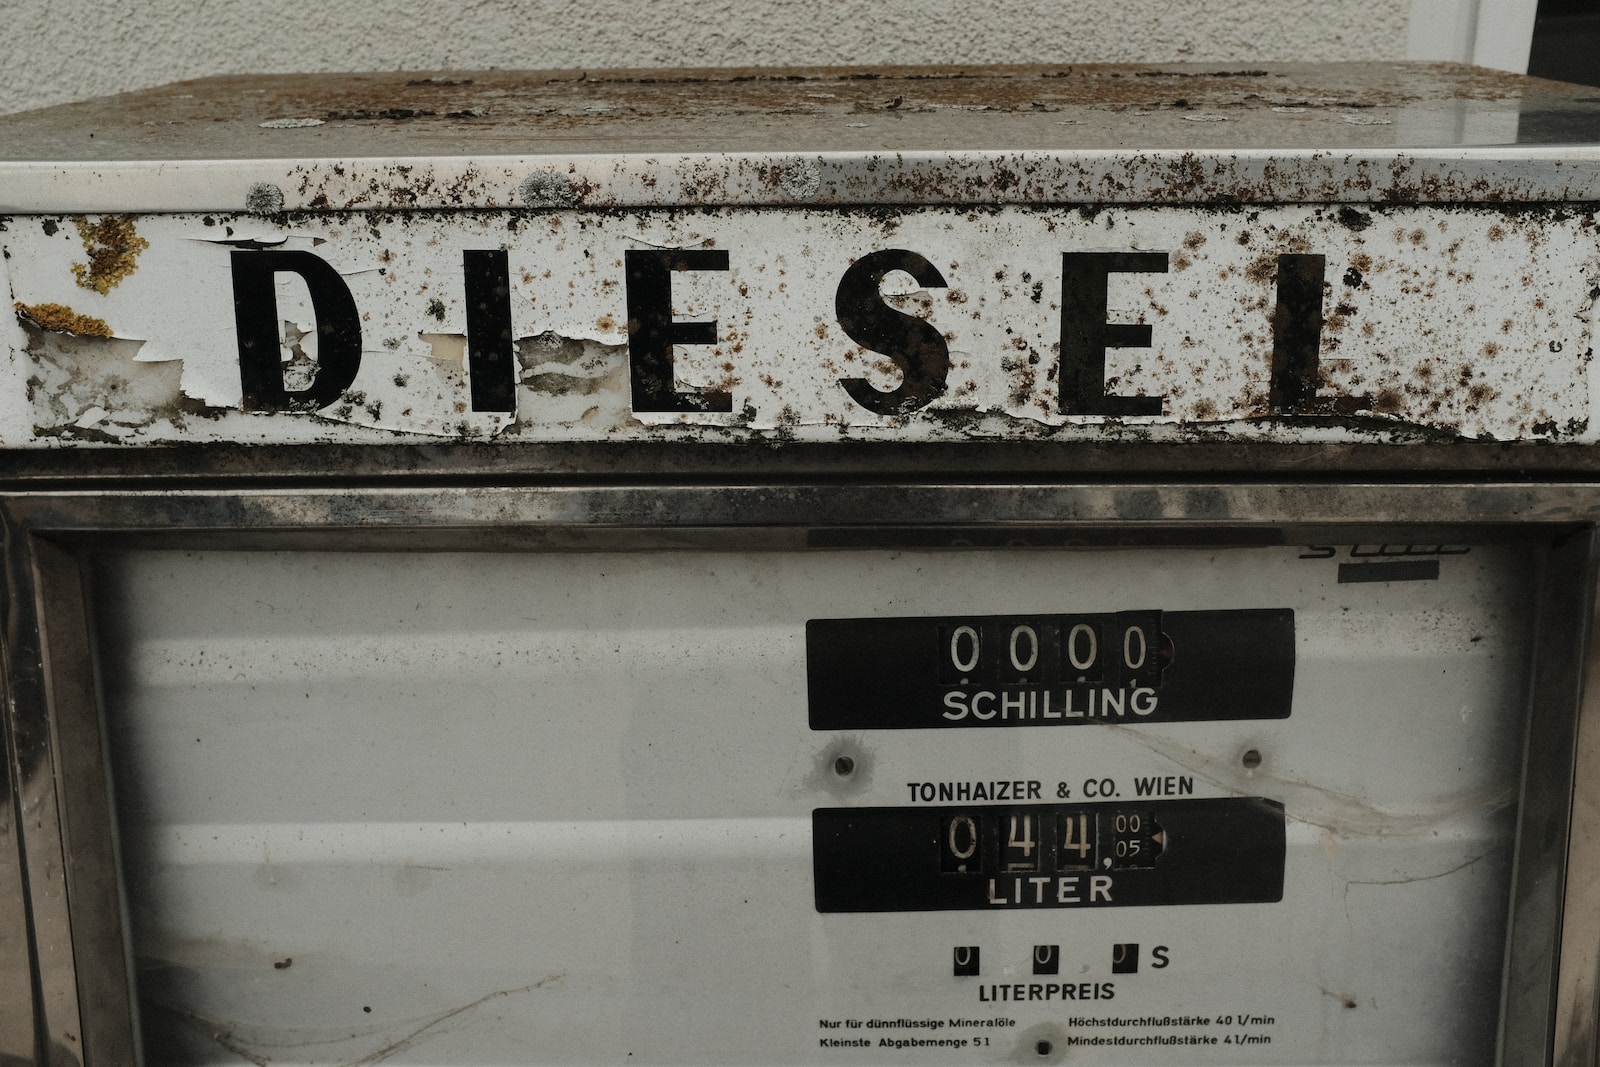 a dirty machine with a sign that says diesel